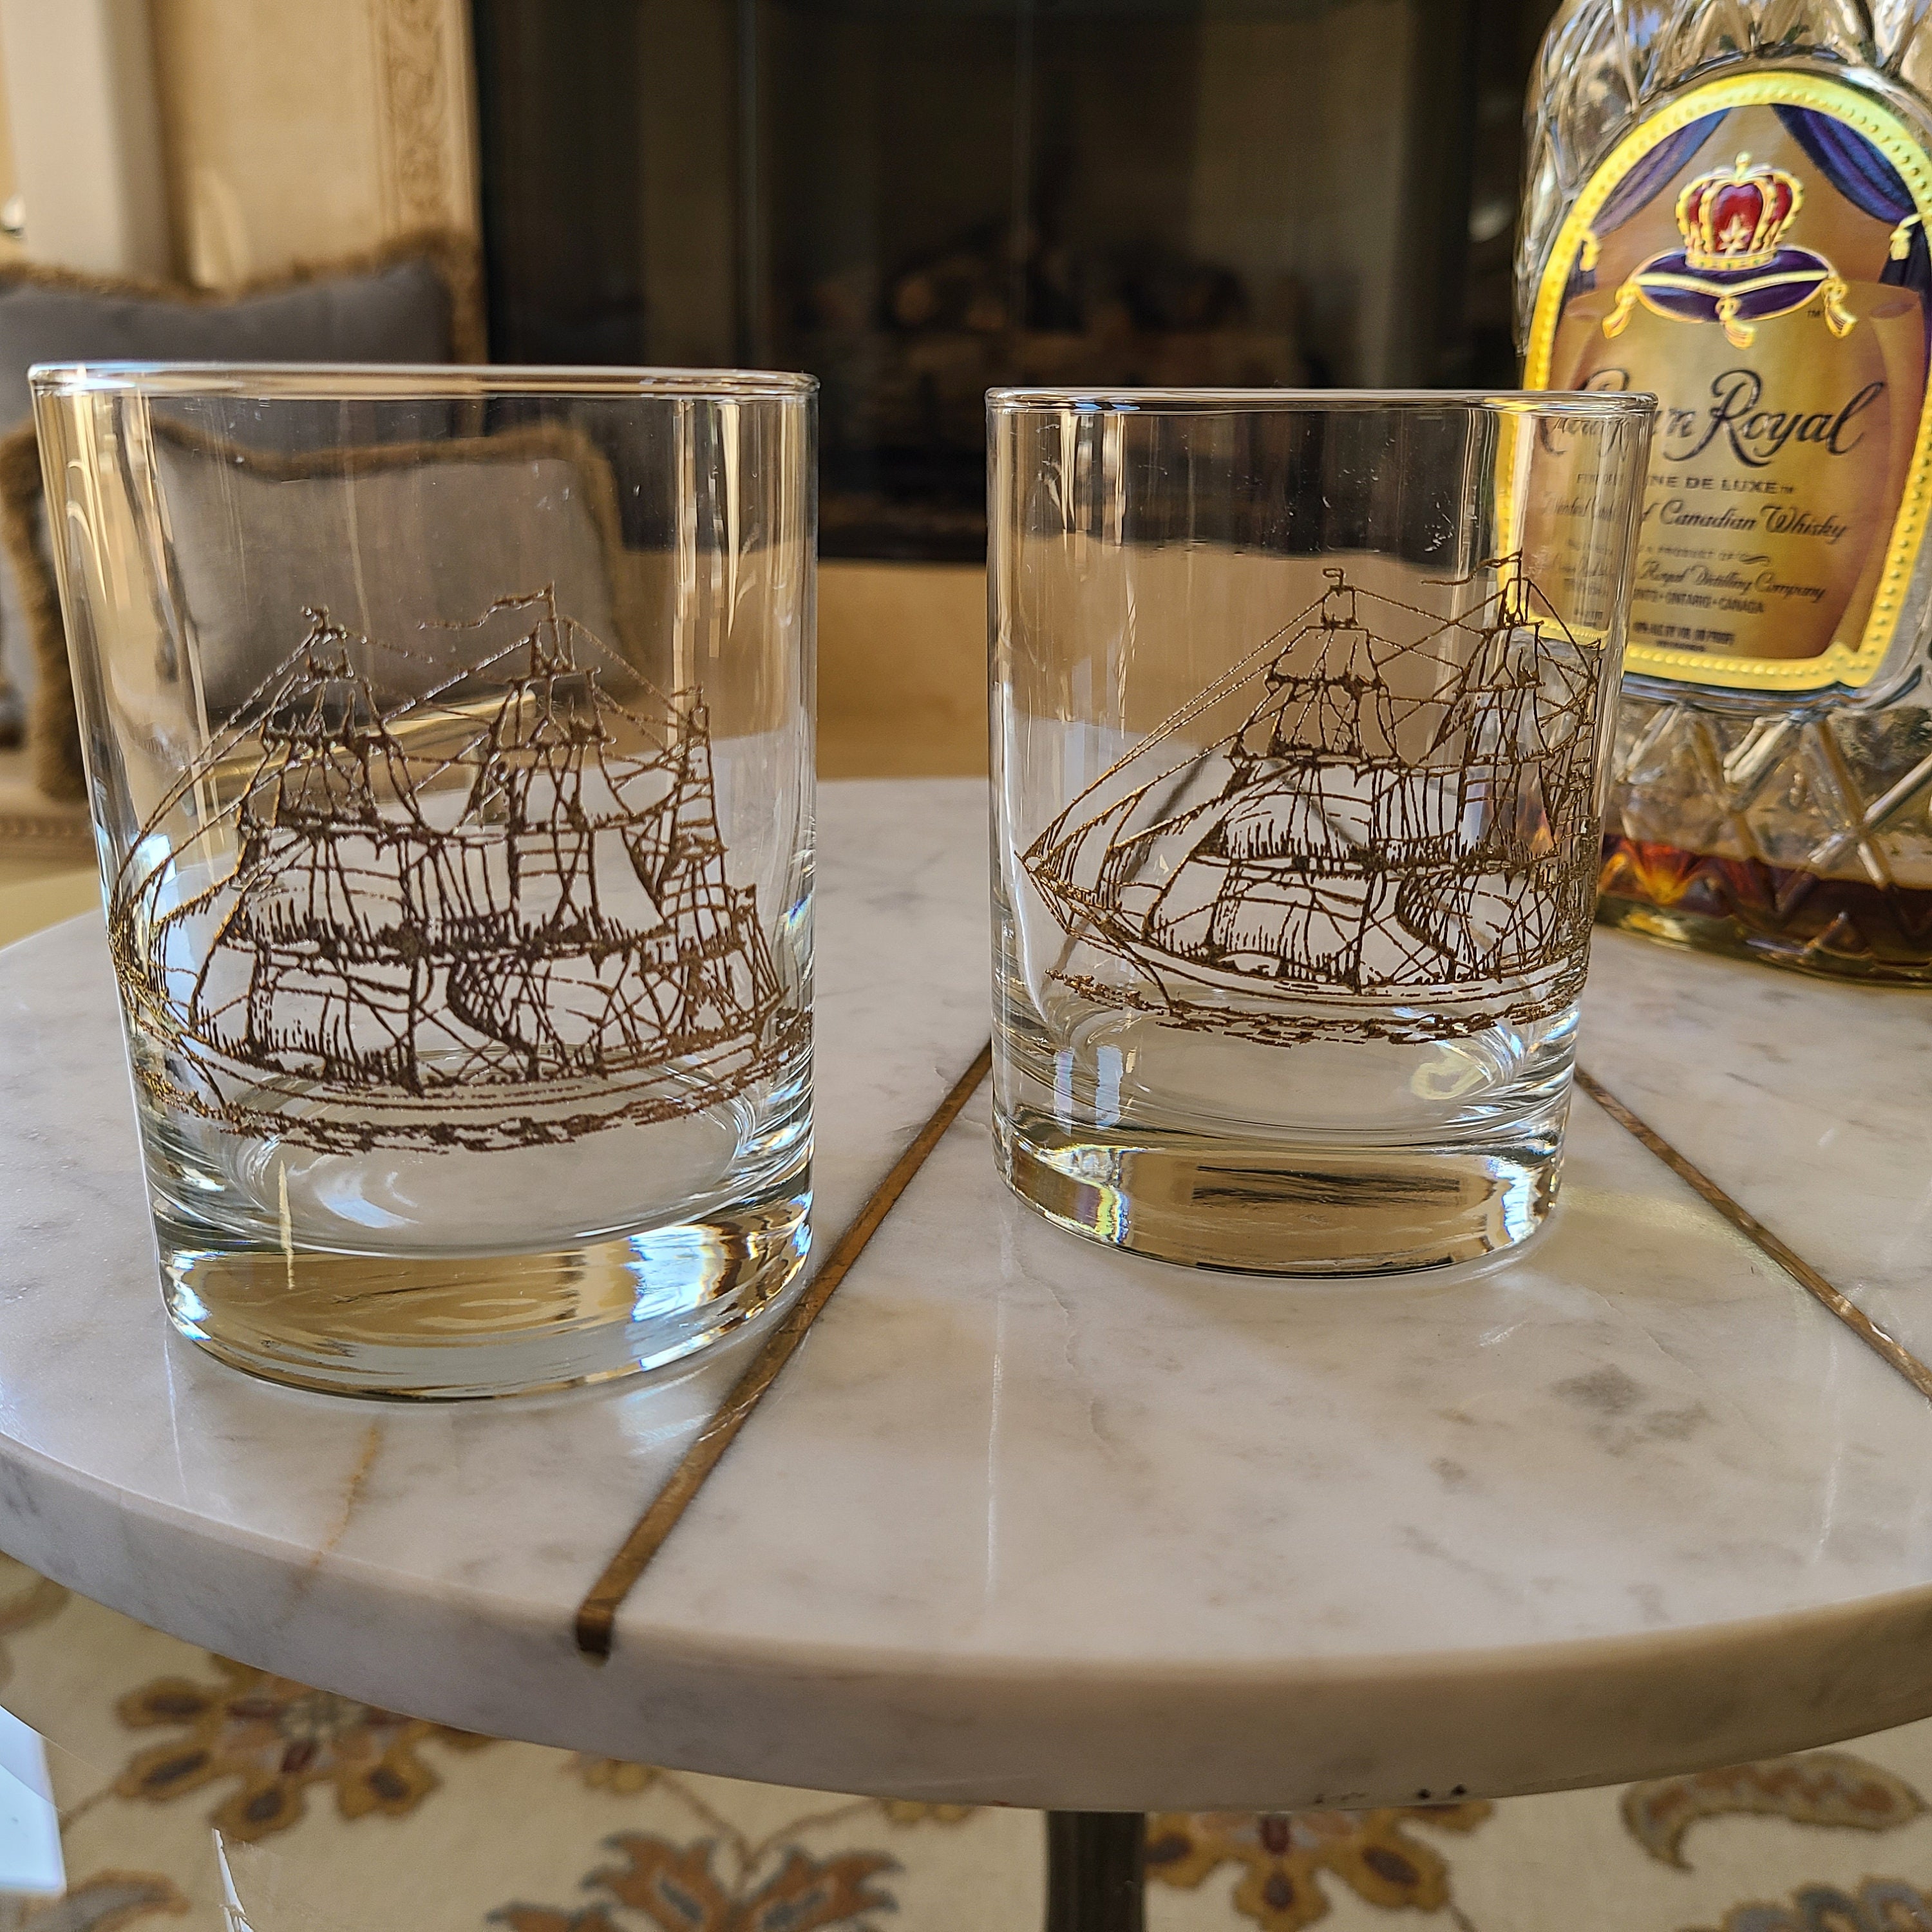 Creative Whisky Glasses, Thick Bottom Old Fashioned Rock Drinking Glassware